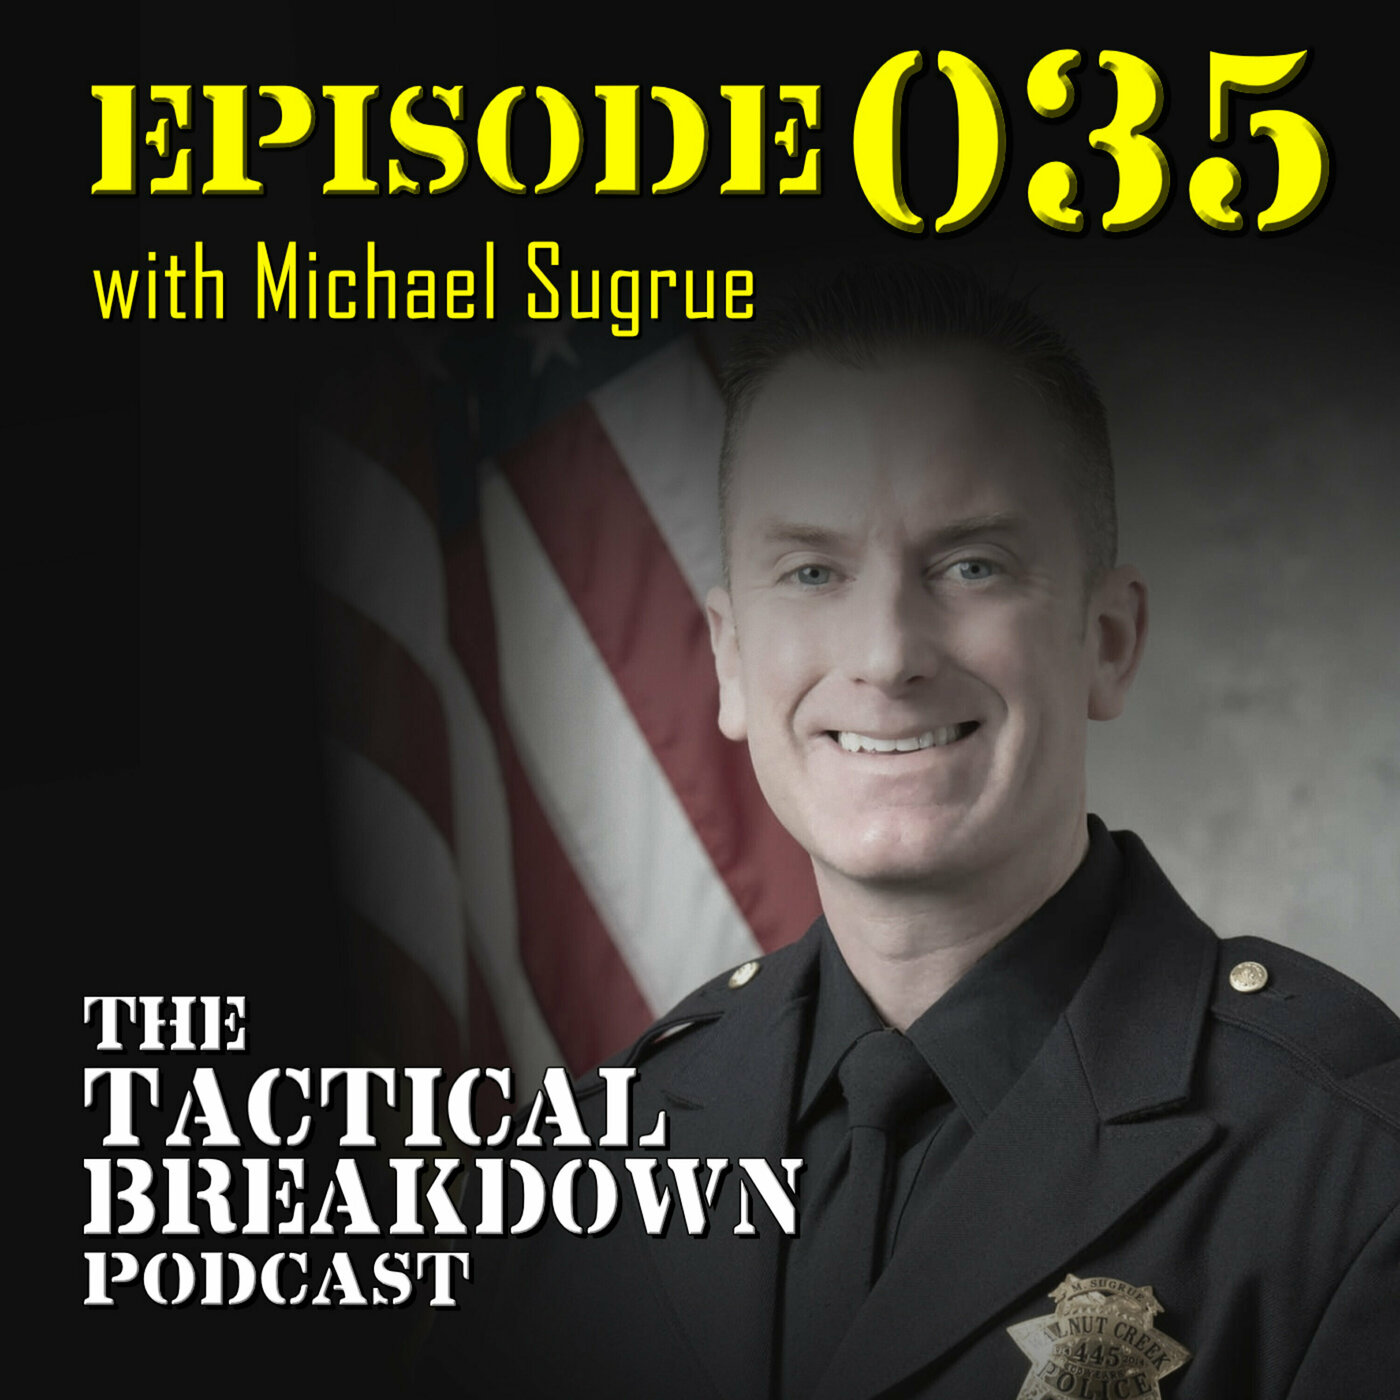 Post Traumatic Stress Injuries in First Responders with Michael Sugrue